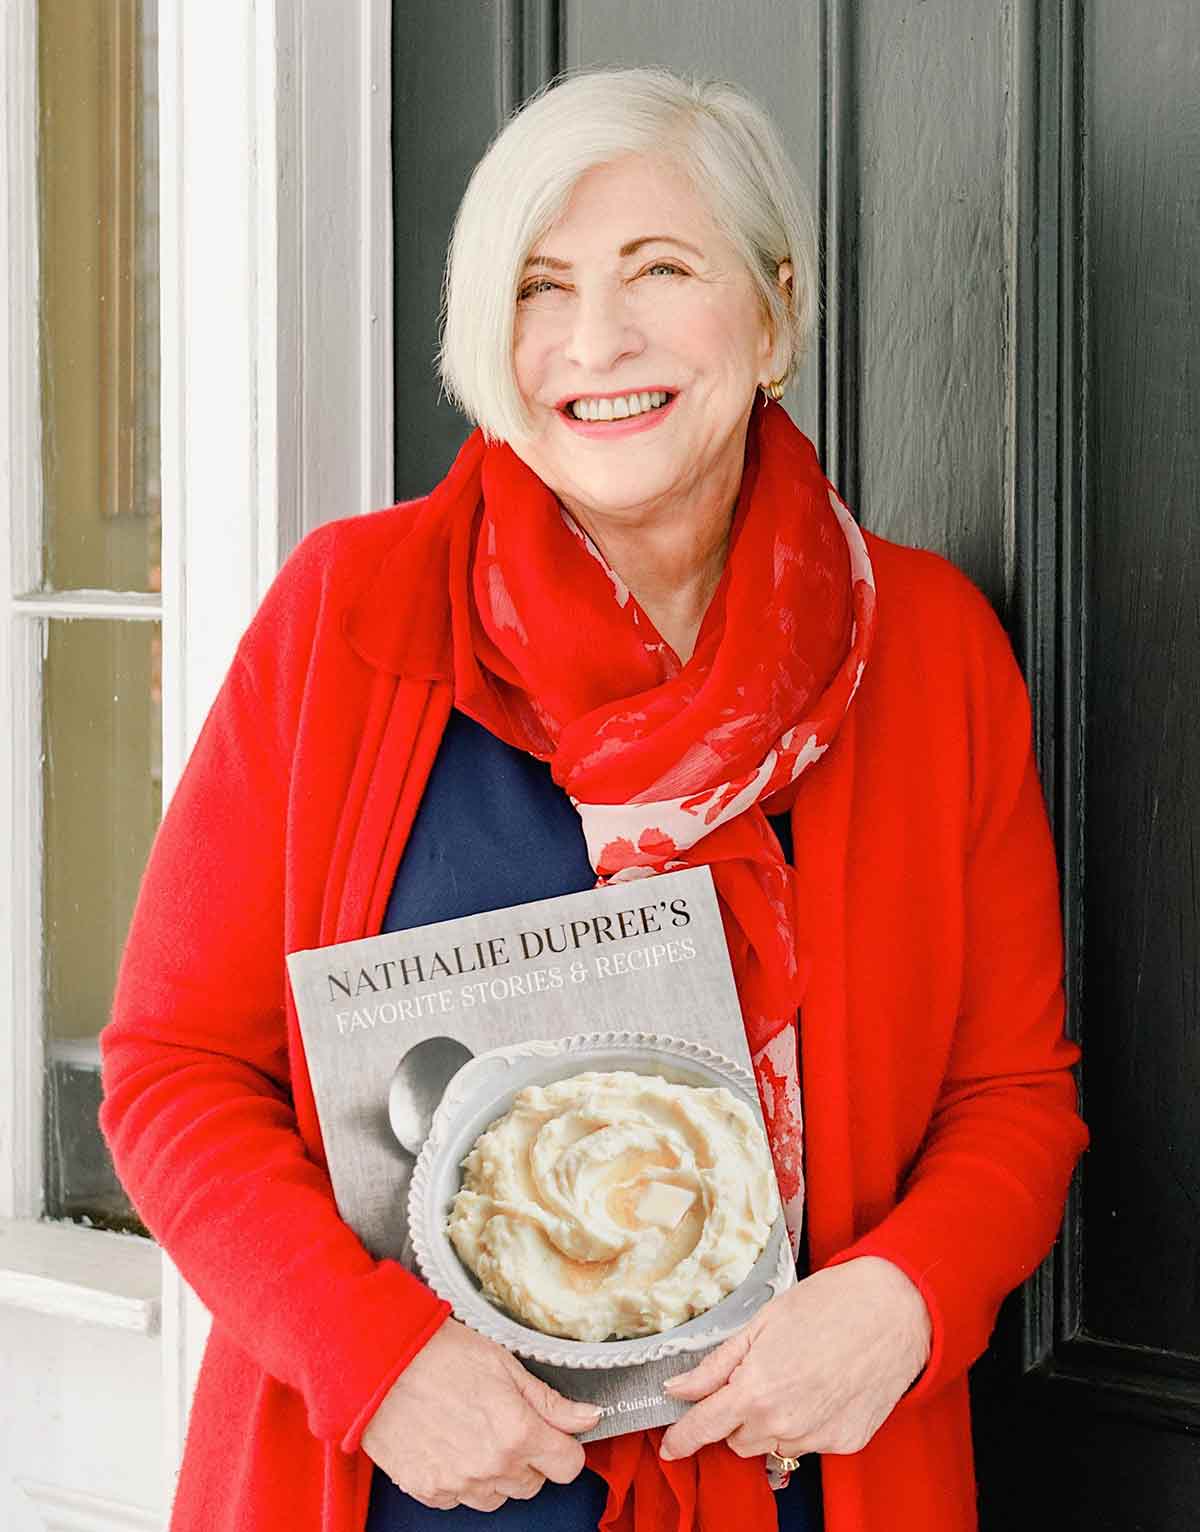 Nathalie Dupree in red sweater holding her cookbook.